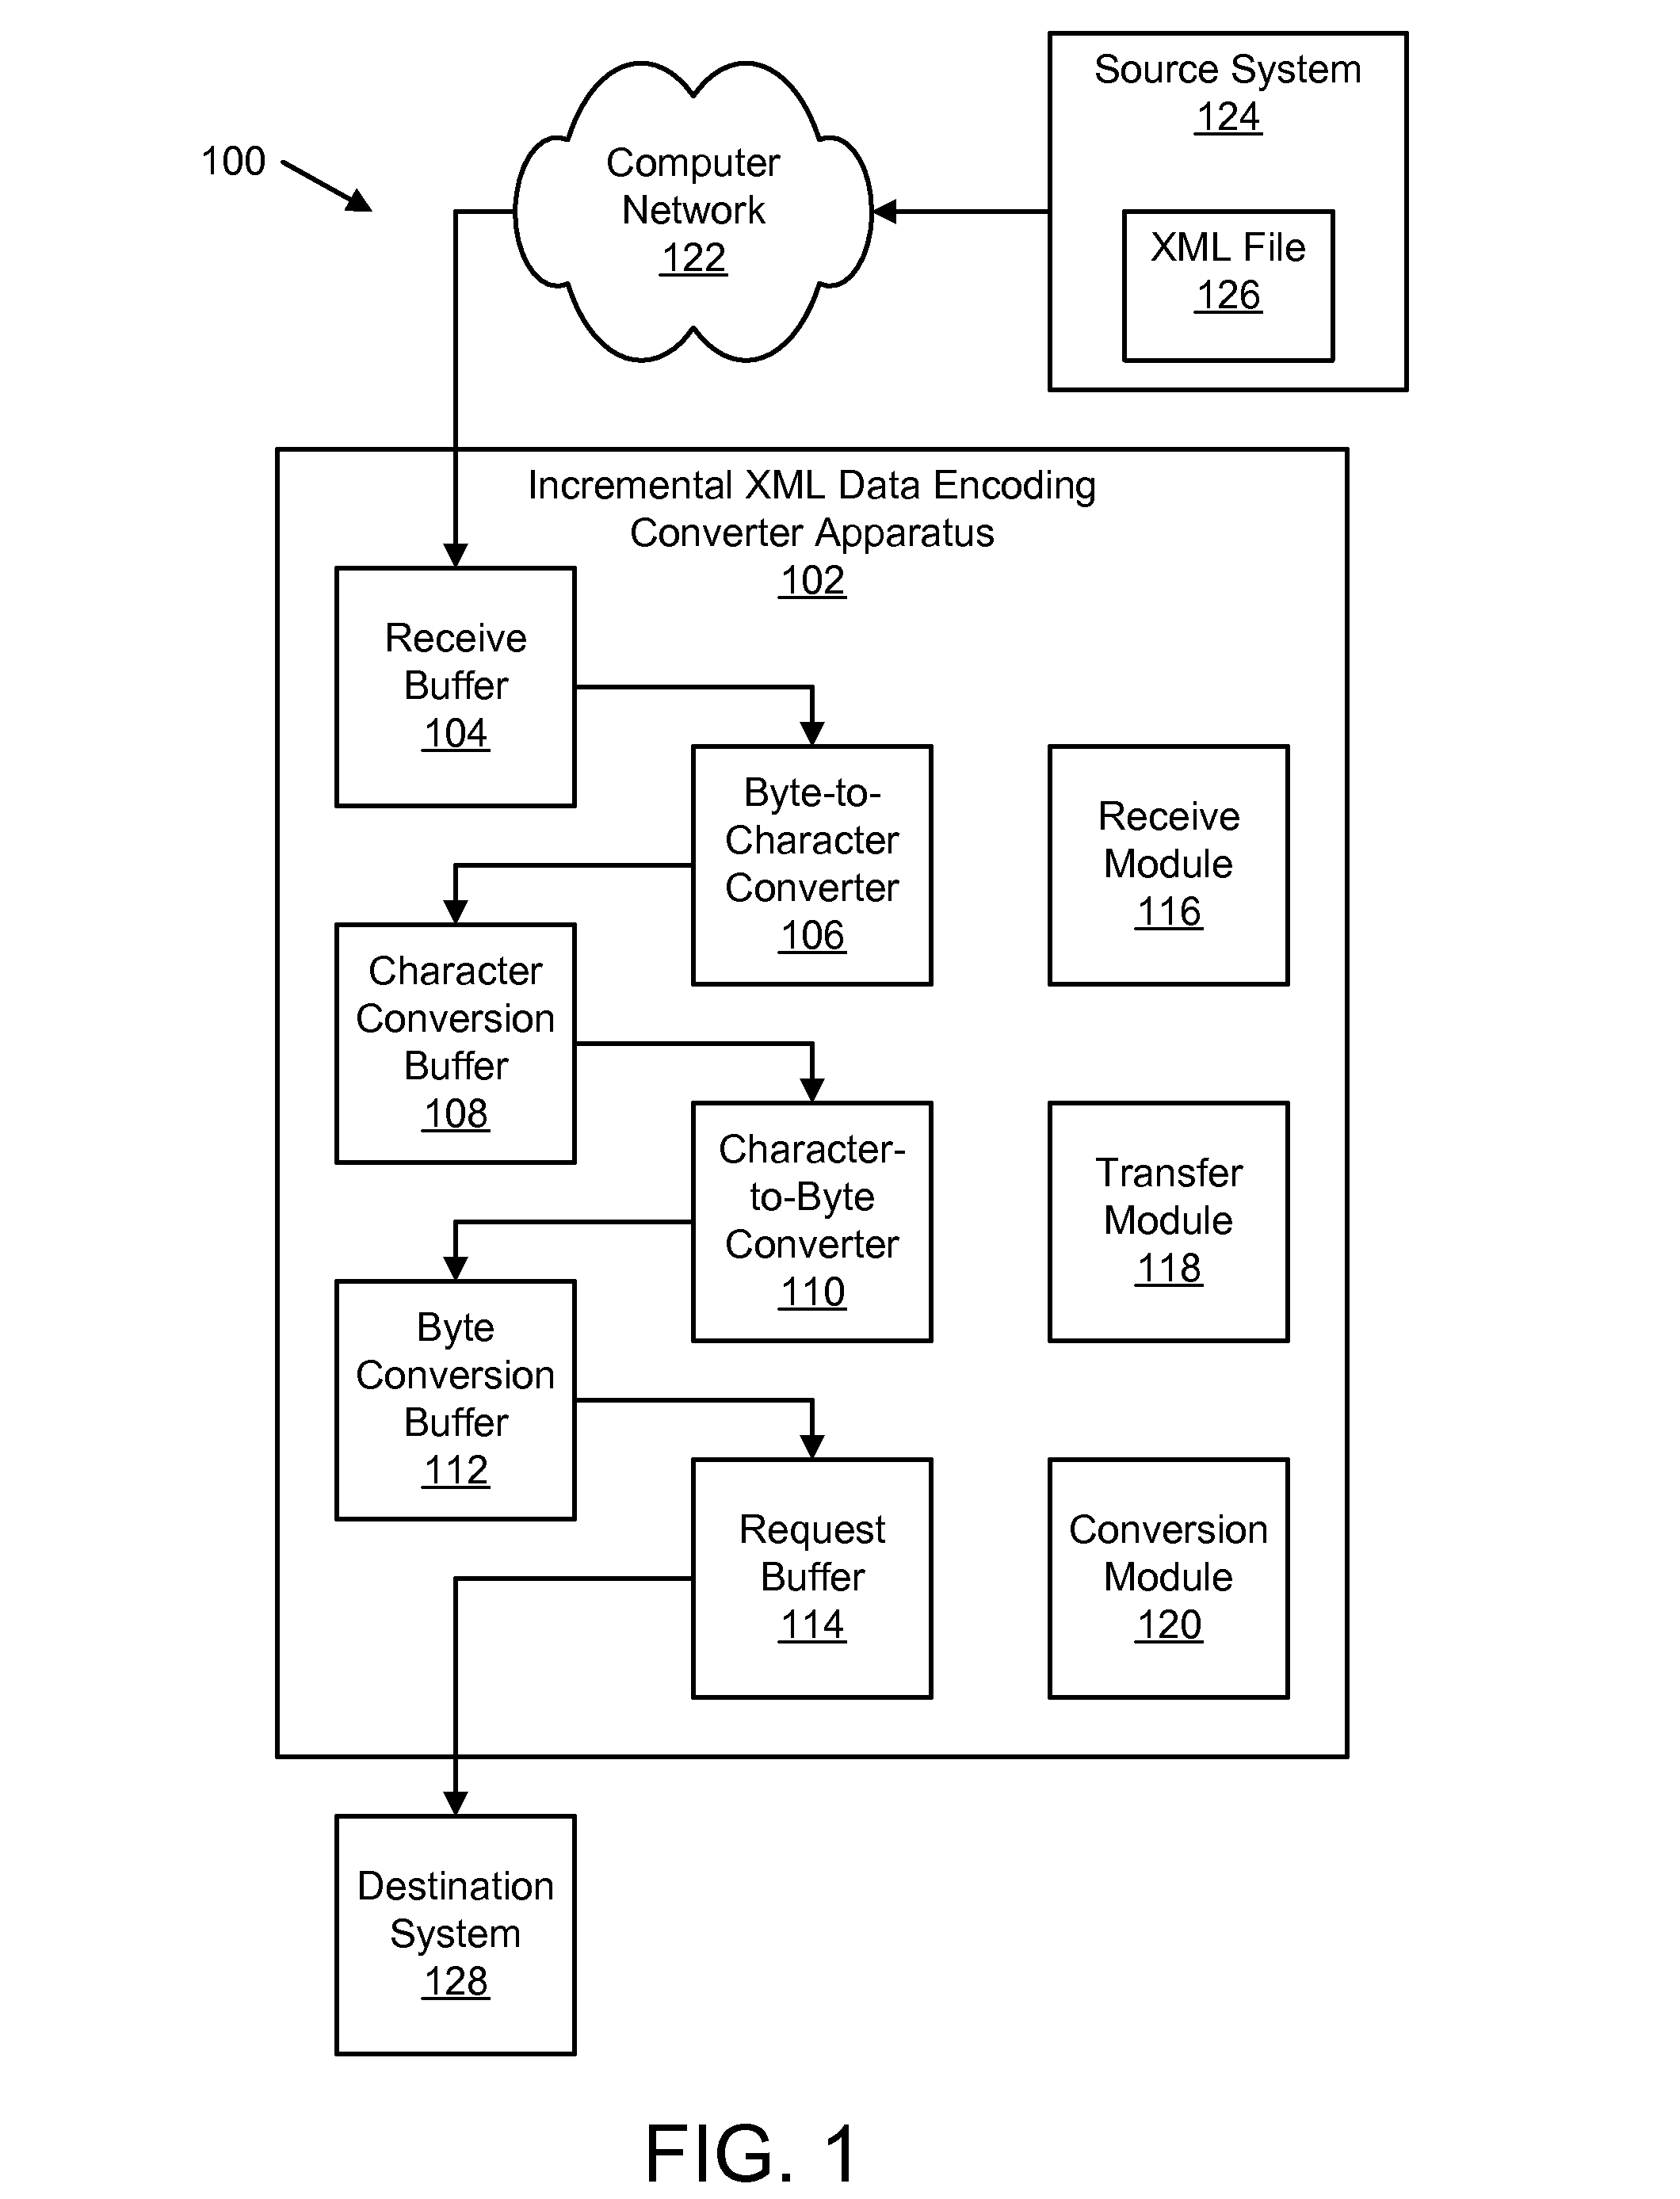 Apparatus, system, and method for incremental encoding conversion of XML data using JAVA